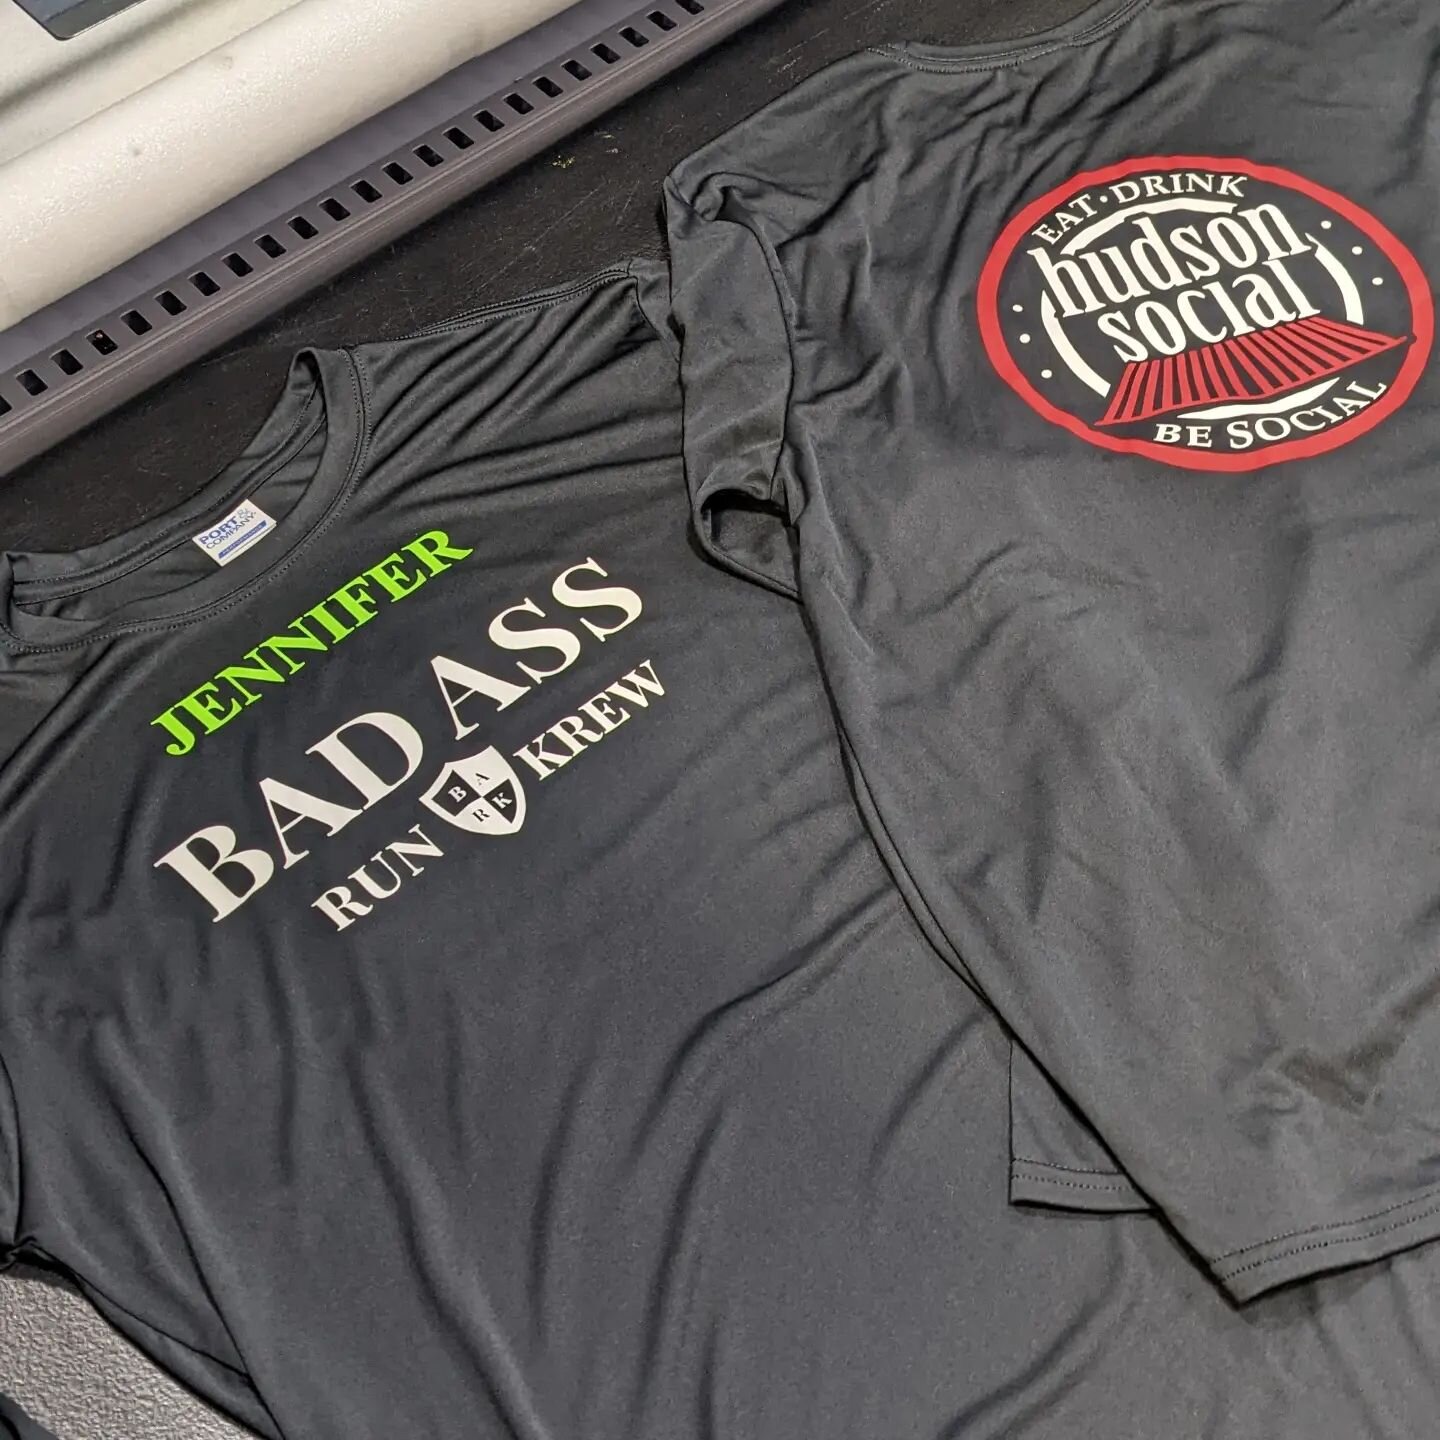 🏃🏃&zwj;♀️More awesome marathon gear running out of the shop!! Best of luck to the @badassrunkrew sponsored by @hudsonsocial !! We can't wait to see you at the finish line 🥇
.
.
.
#theleaguebrand #badassrunkrew #hudsonsocial #dobbsferry #nyc #nycma